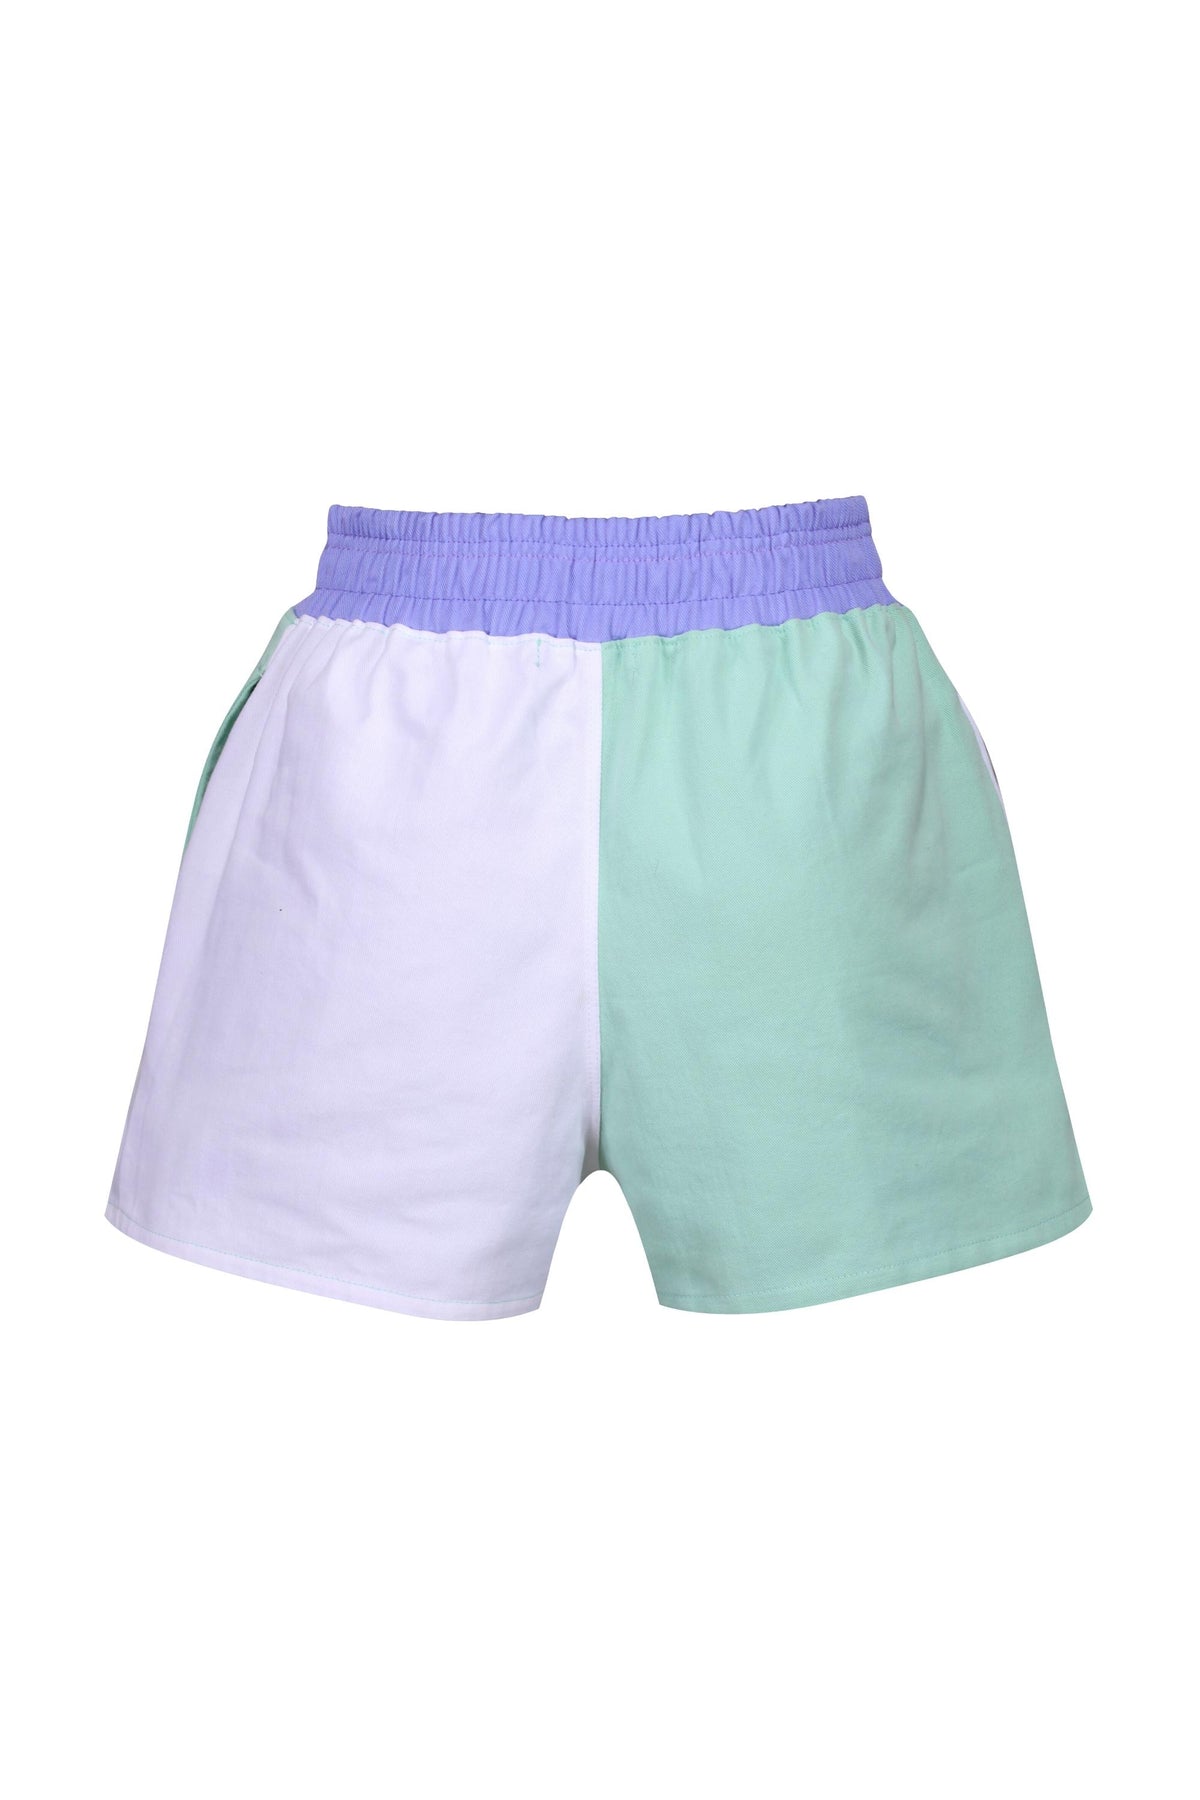 Heacham Rugby Shorts - White/Mint - Whale Of A Time Clothing